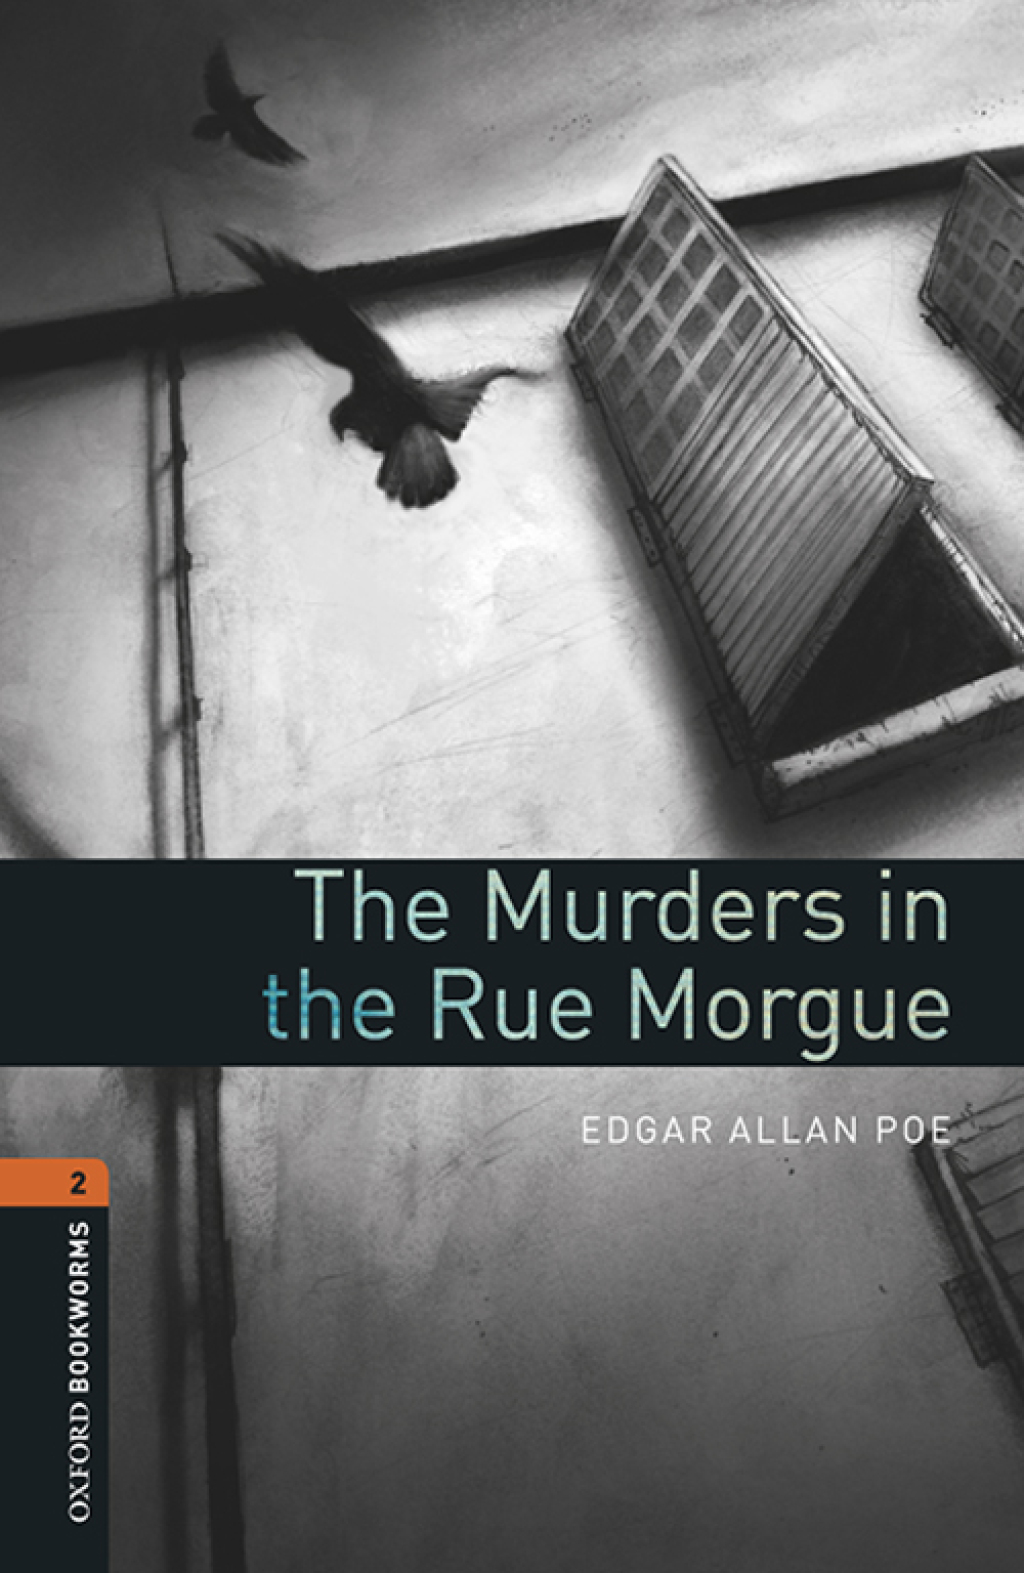 The Murders in the Rue Morgue Level 2 Oxford Bookworms Library - 3rd Edition (eBook Rental)